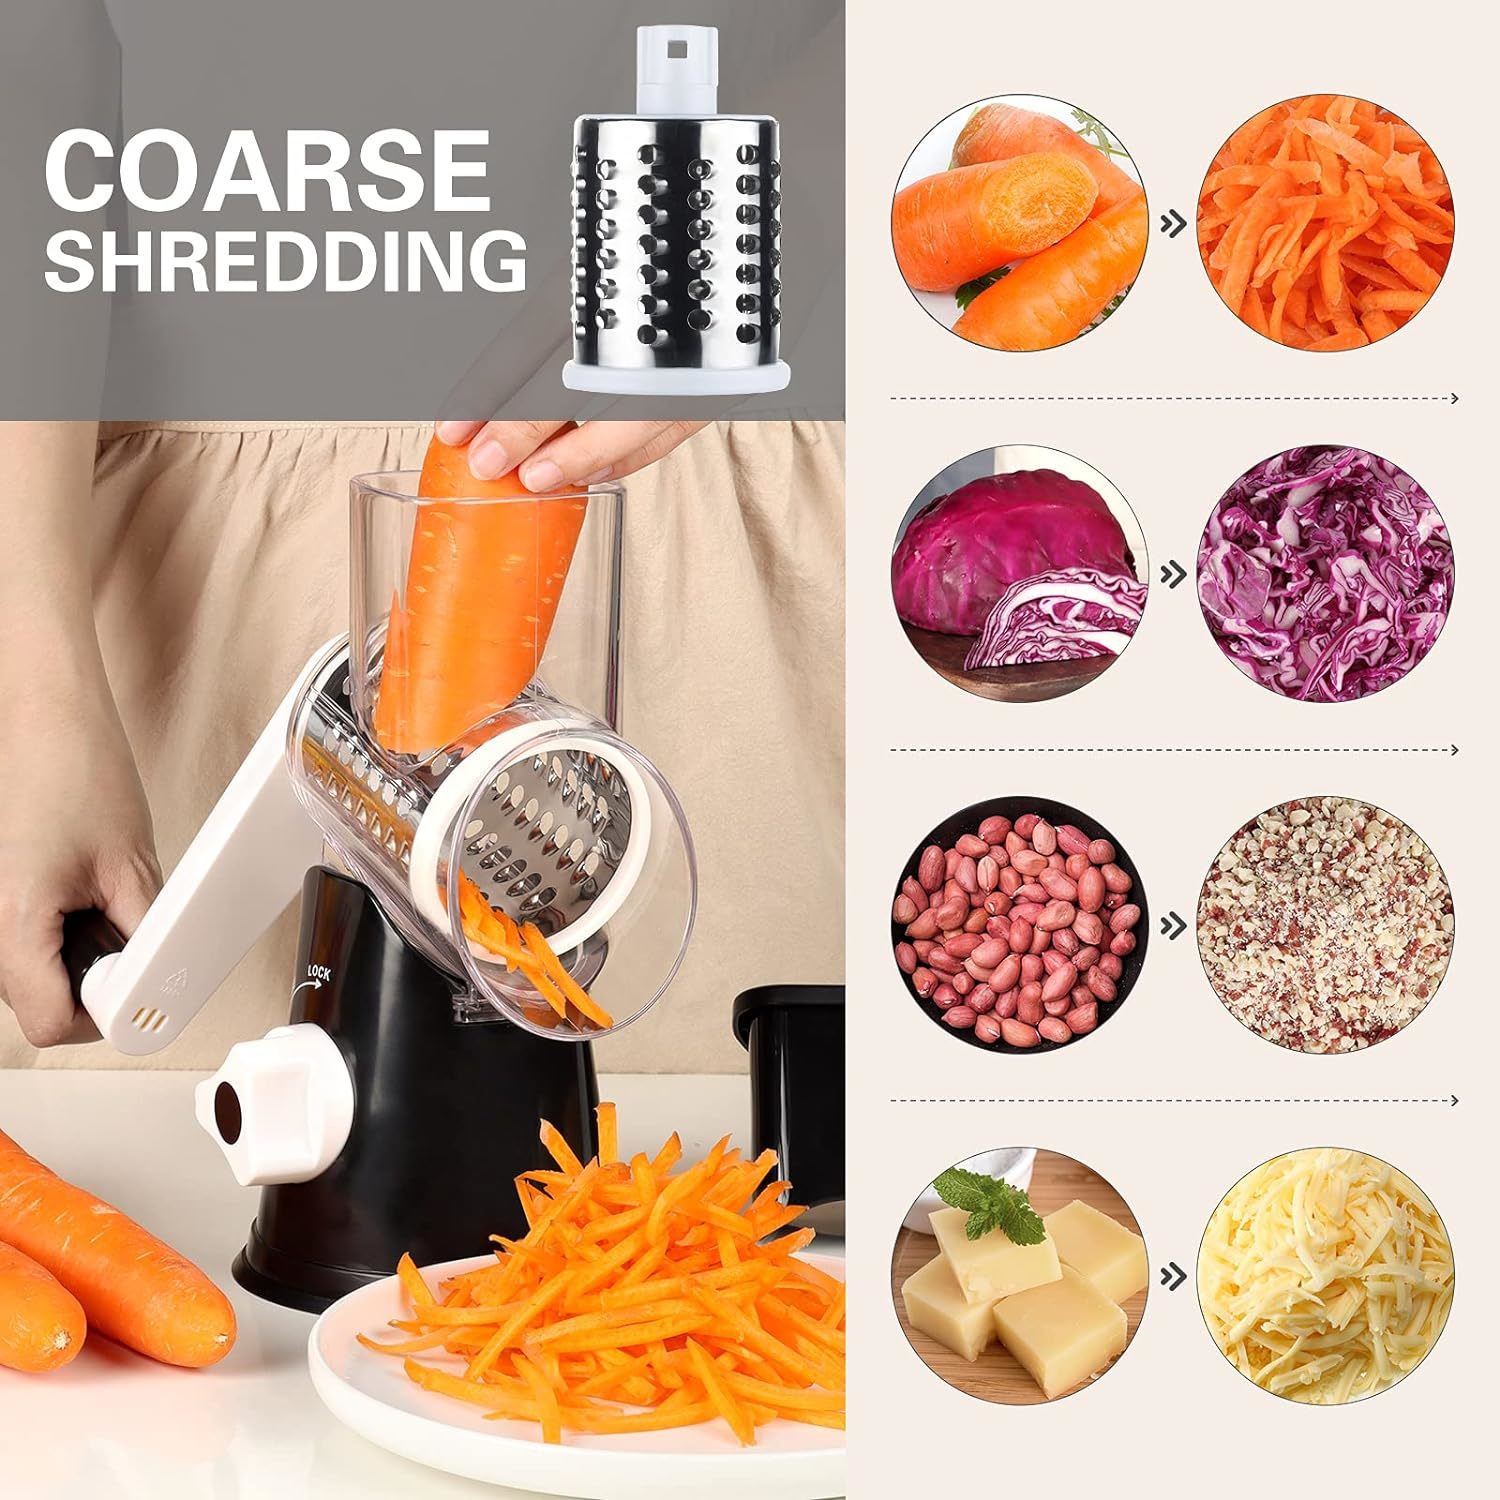 Wooden Cheese Grater with Handle,Rustic Brown Cheese Shredder with